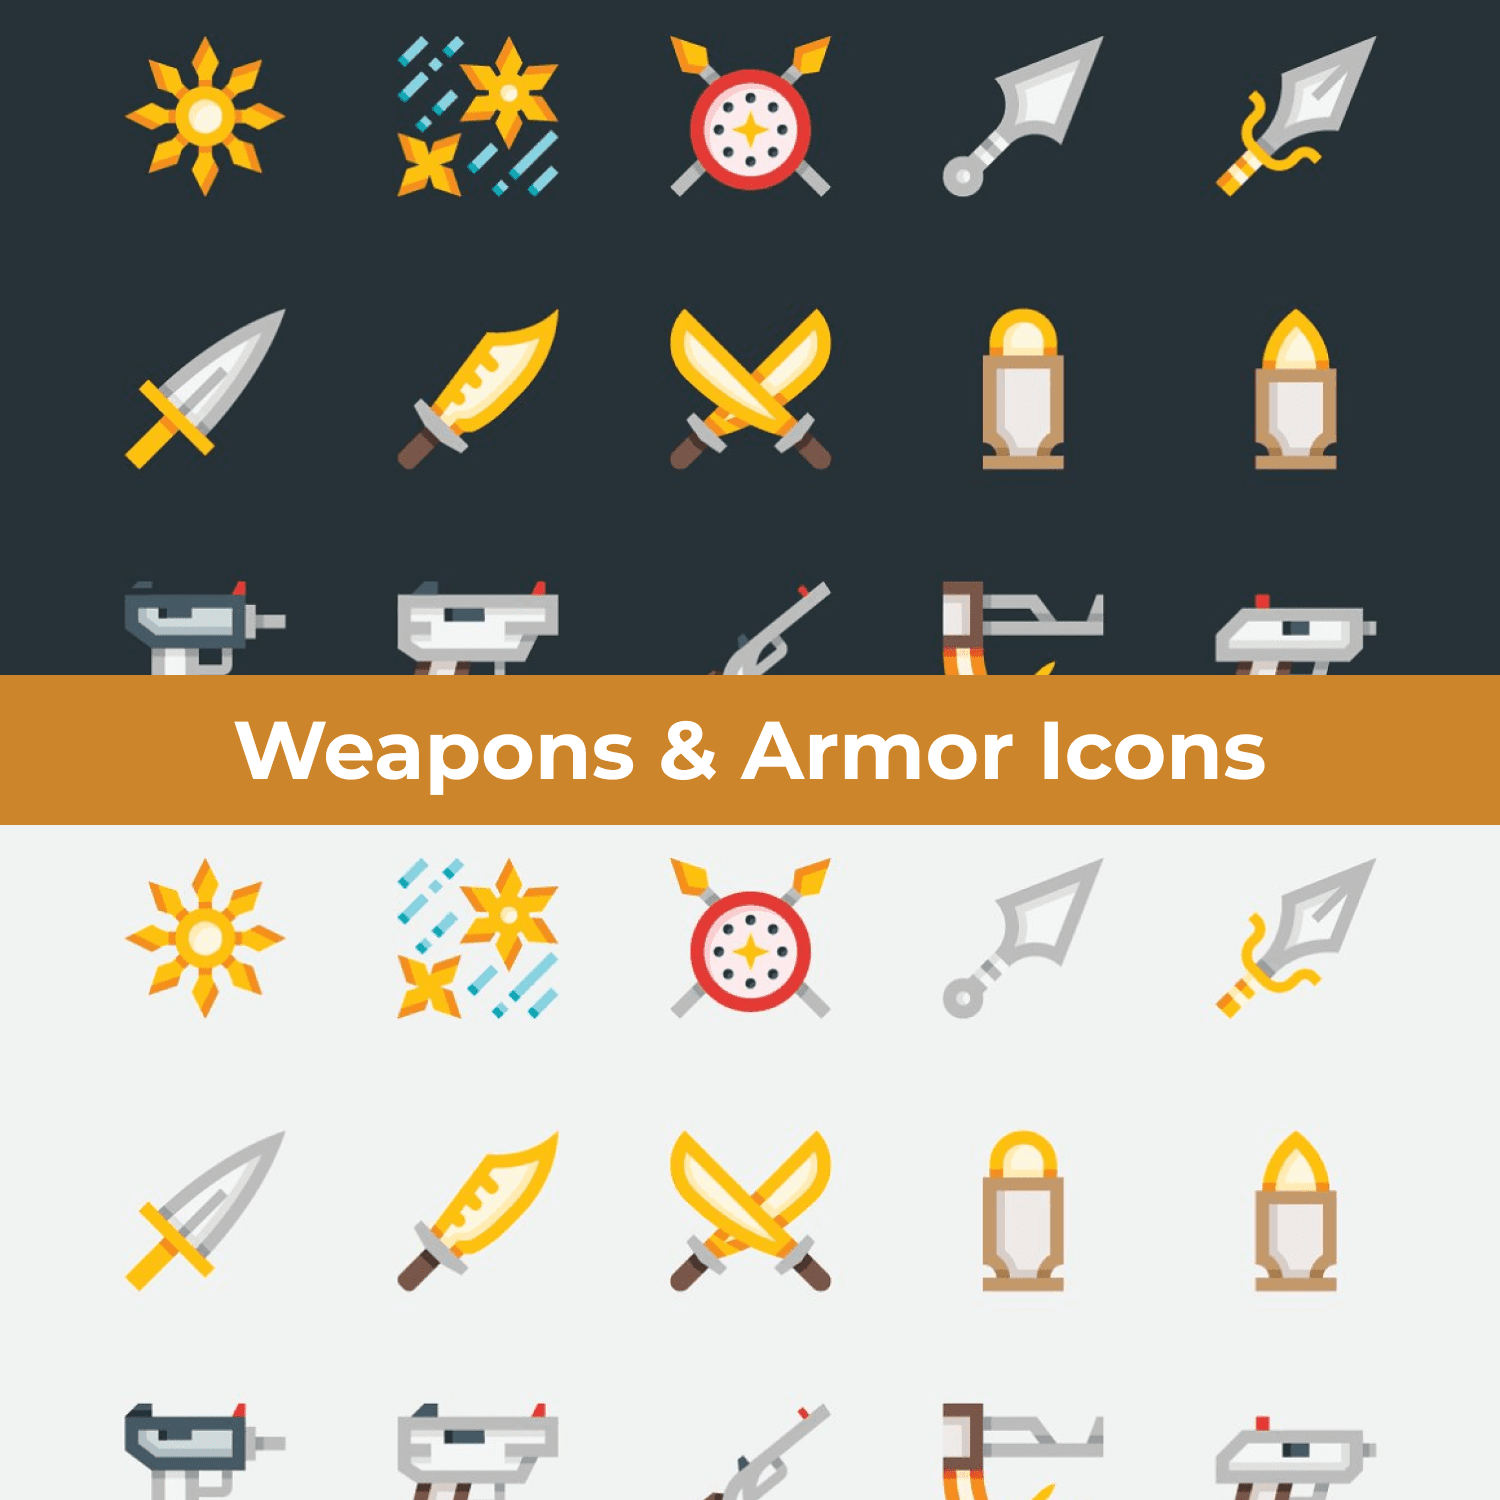 Weapons & Armor Icons cover image.